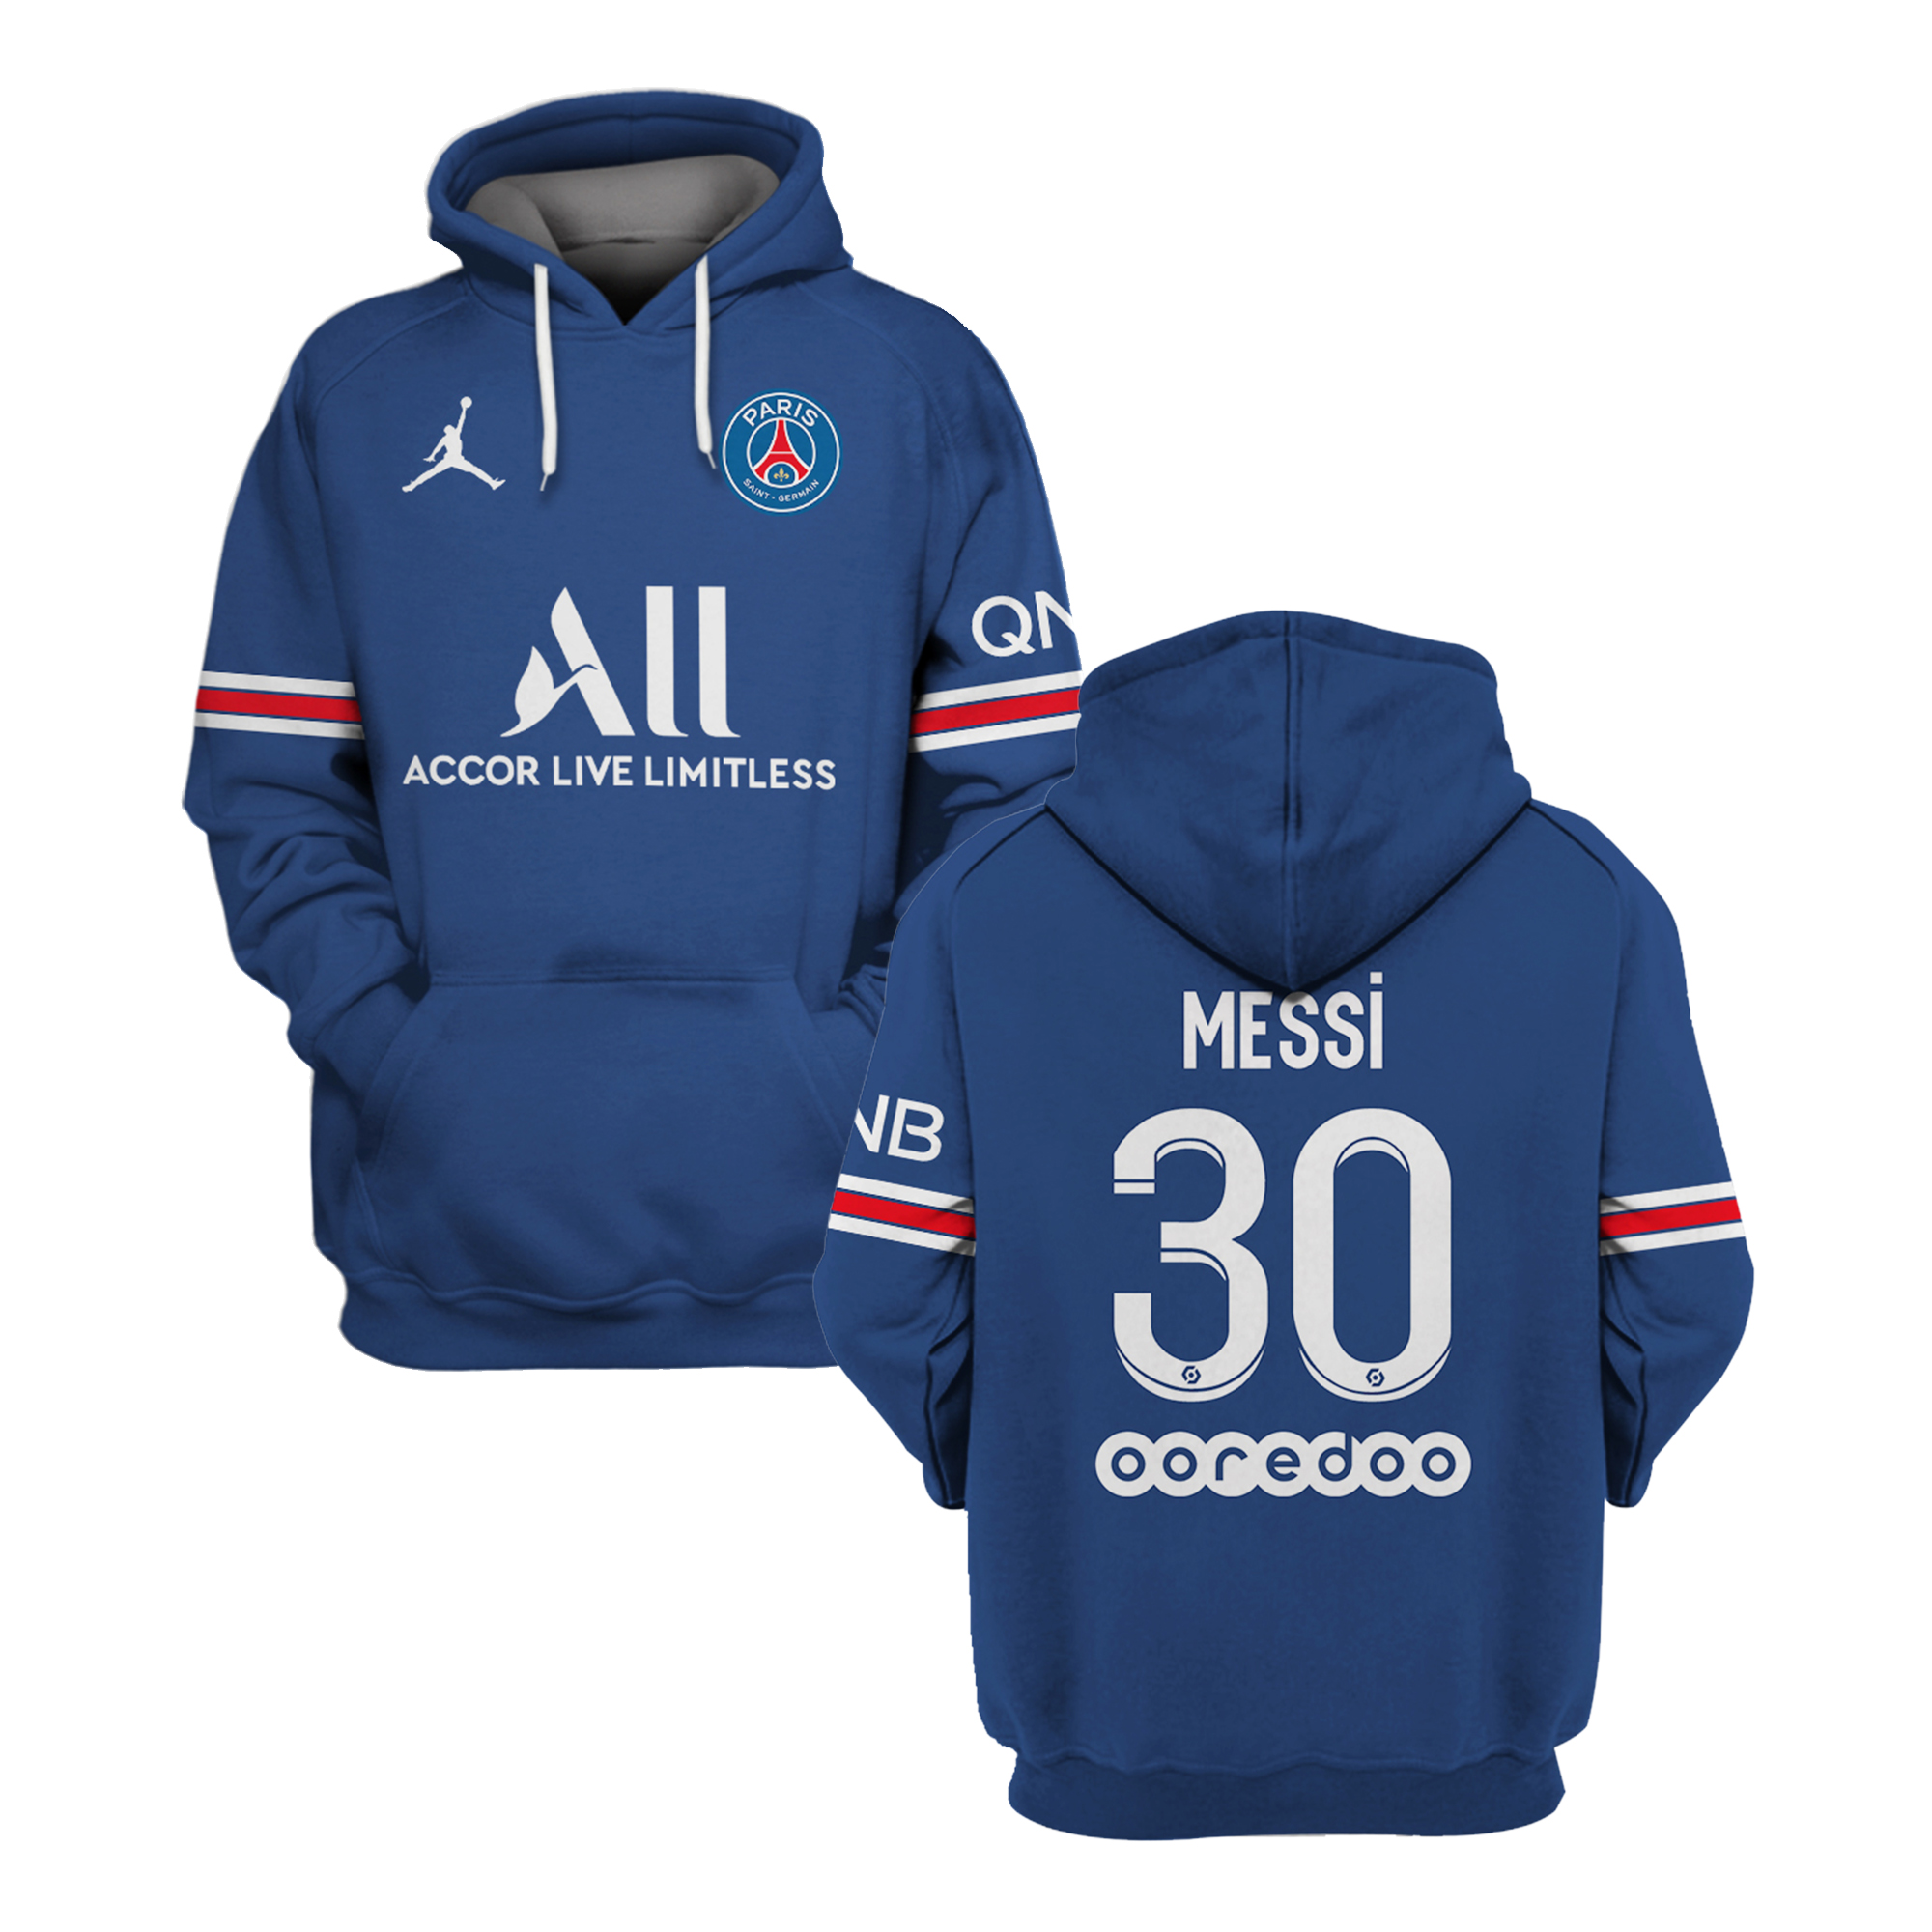 PSG Messi 3d hoodie and shirt – LIMITED EDITION